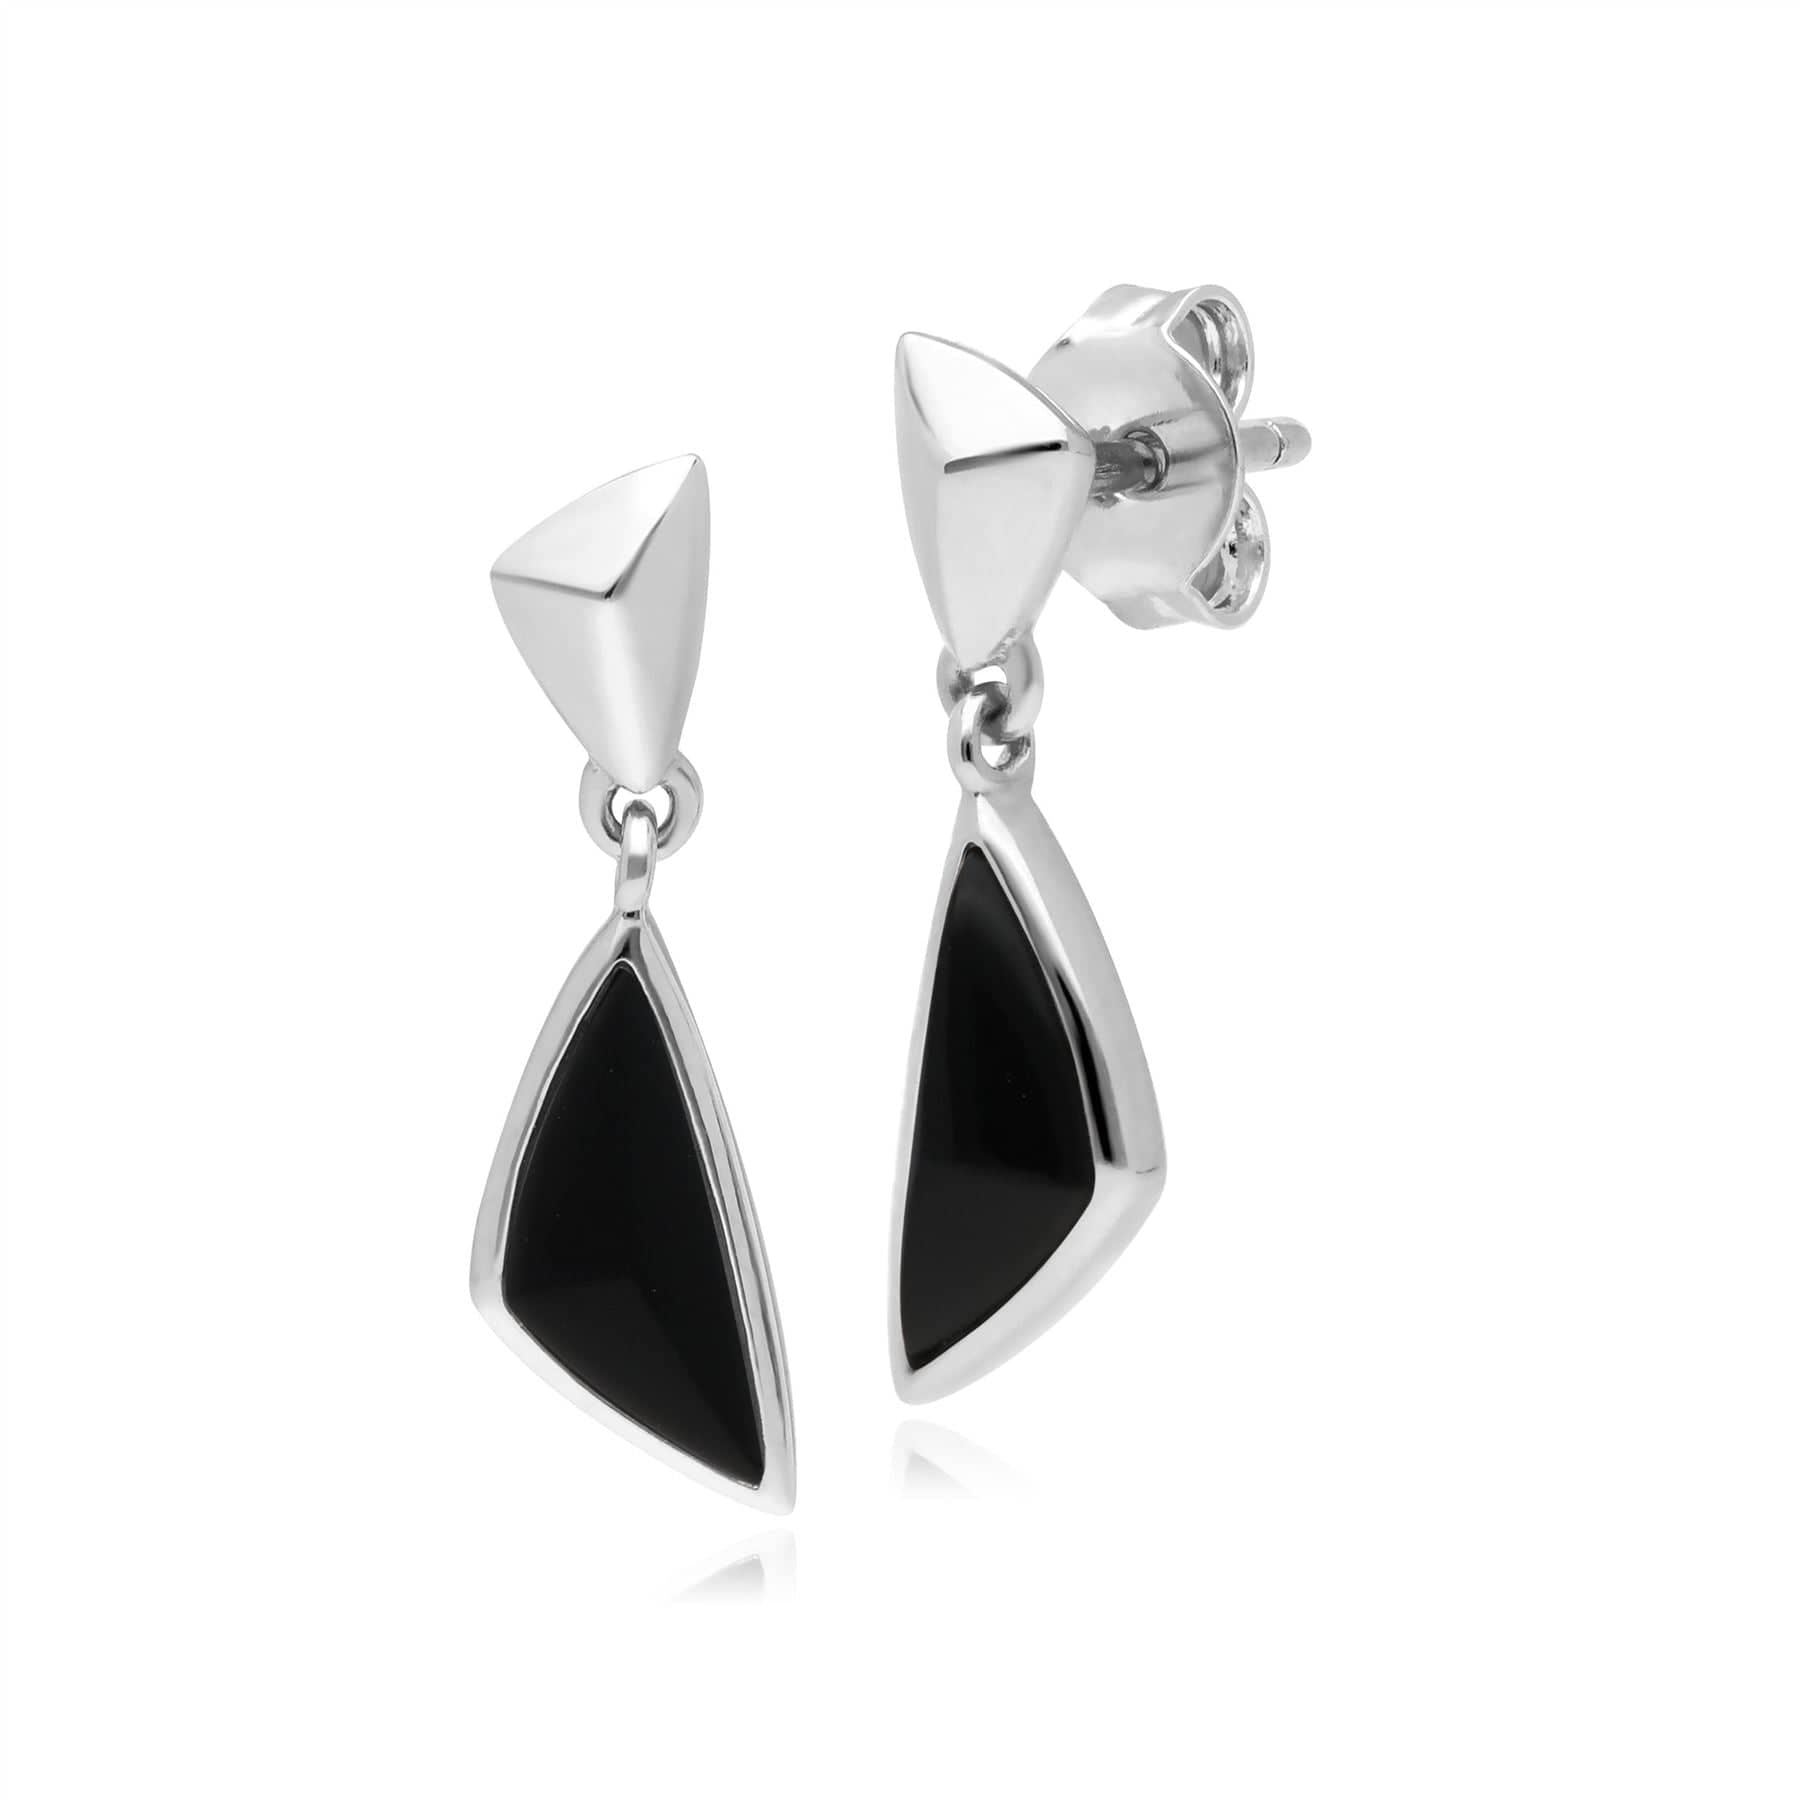 Photos - Earrings Micro Statement Black Onyx Drop  in Sterling Silver